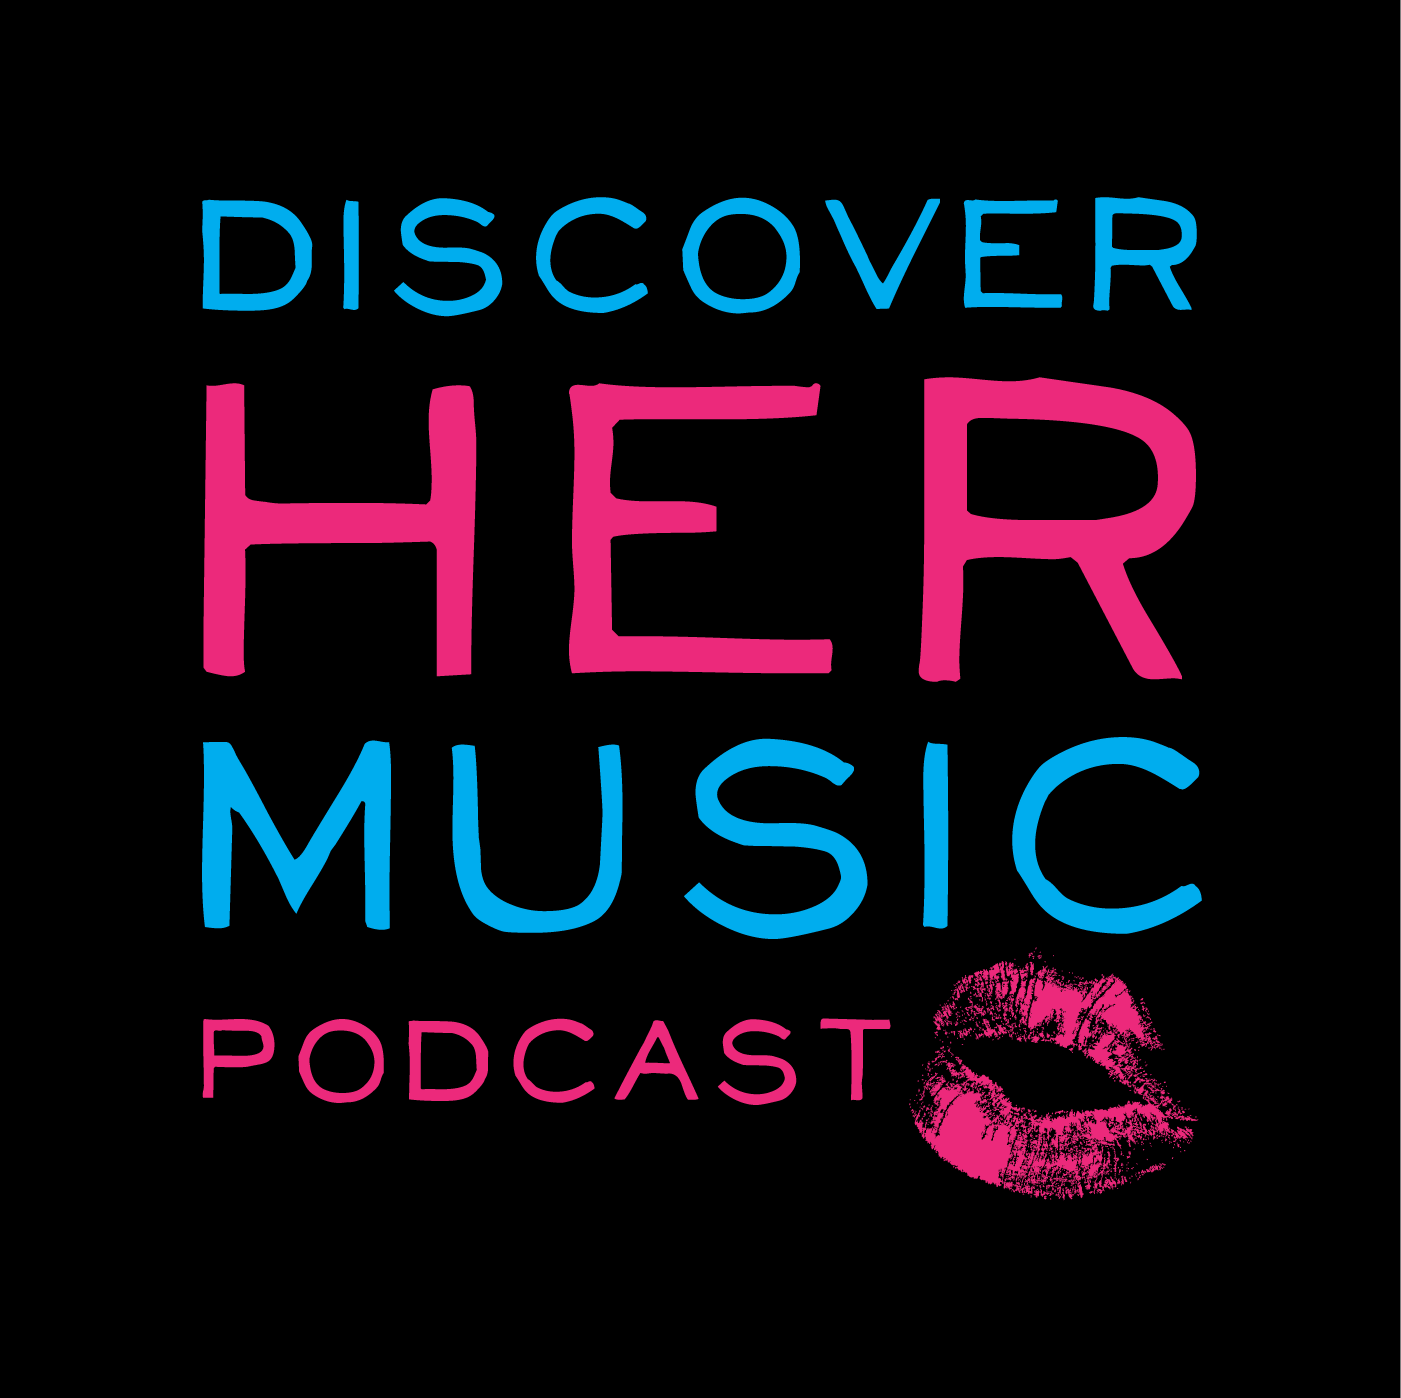 Discover Her Music Podcast Logo